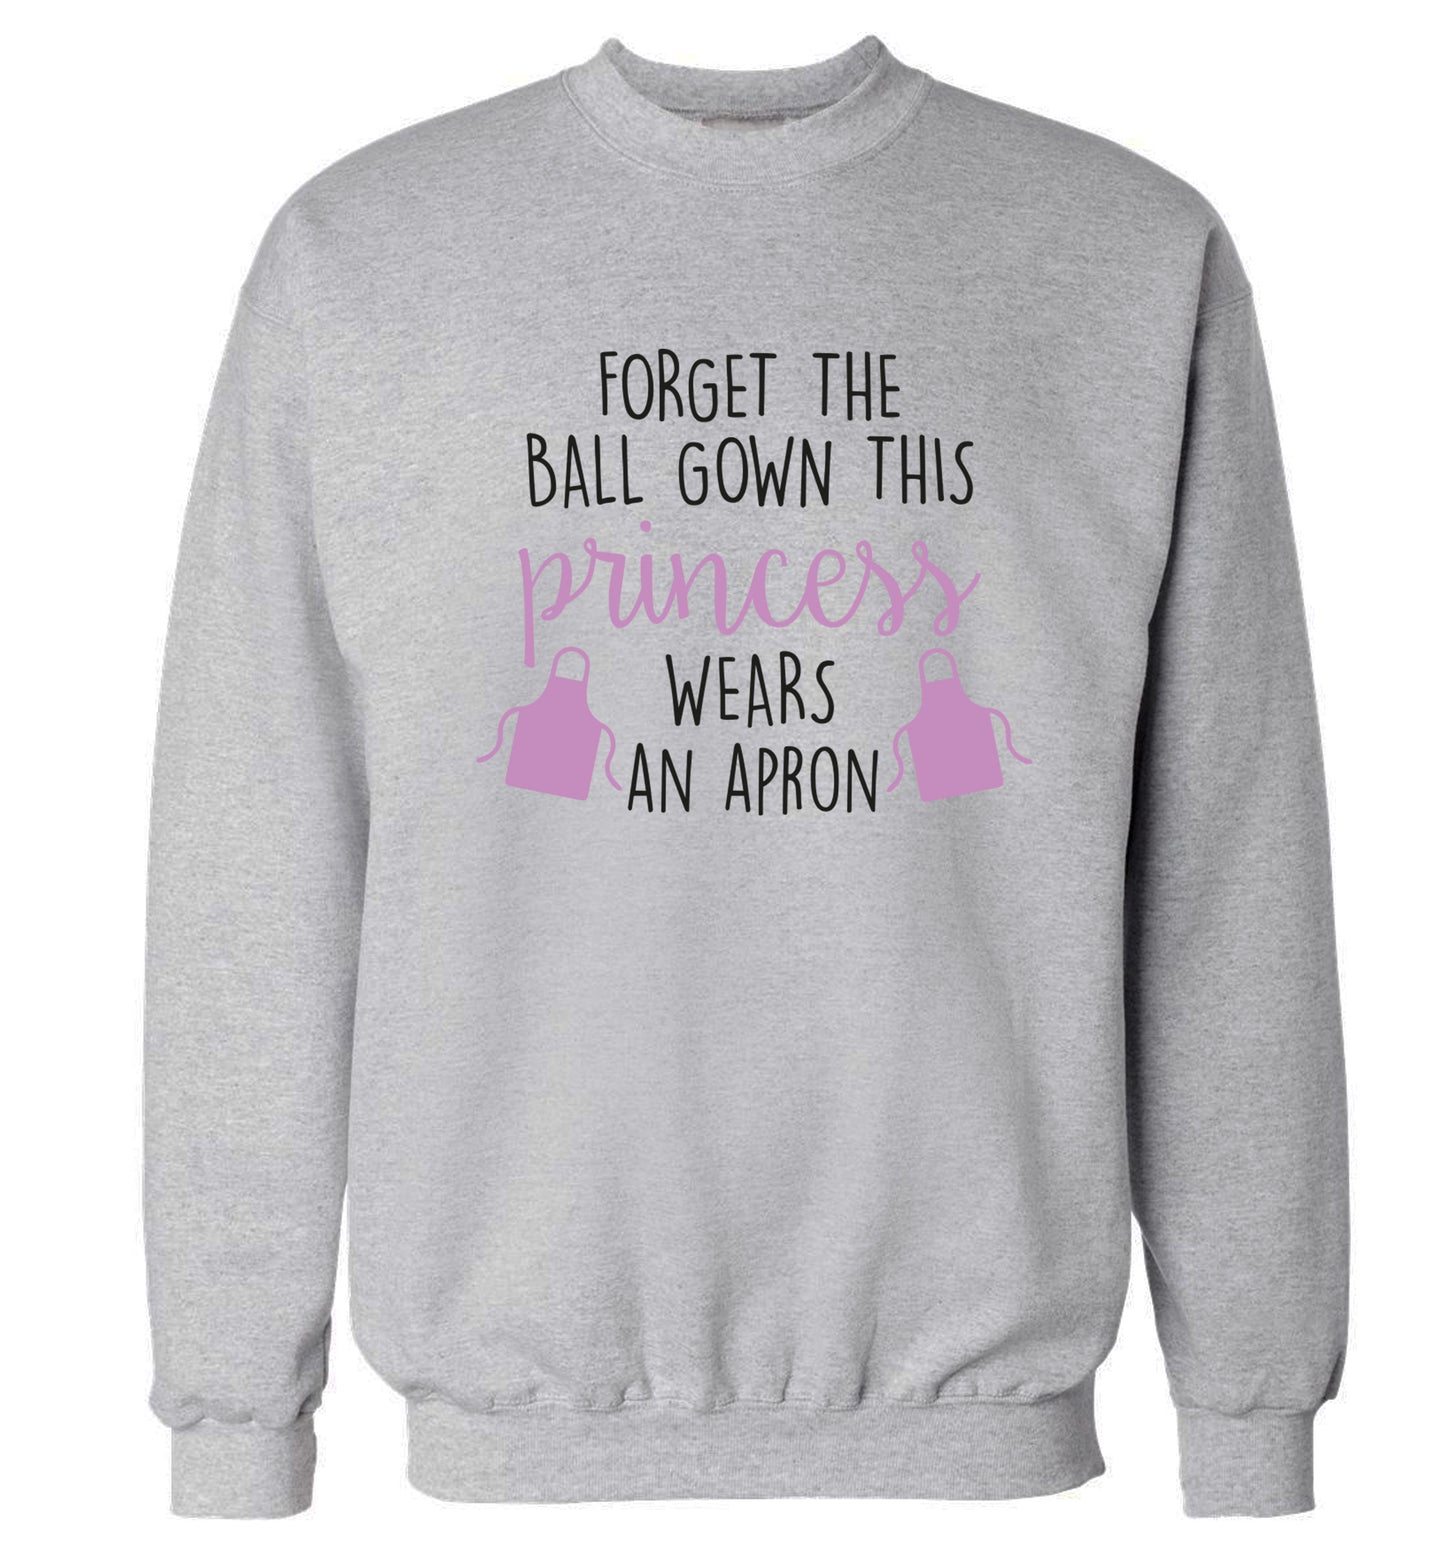 Forget the ball gown this princess wears an apron Adult's unisex grey Sweater 2XL